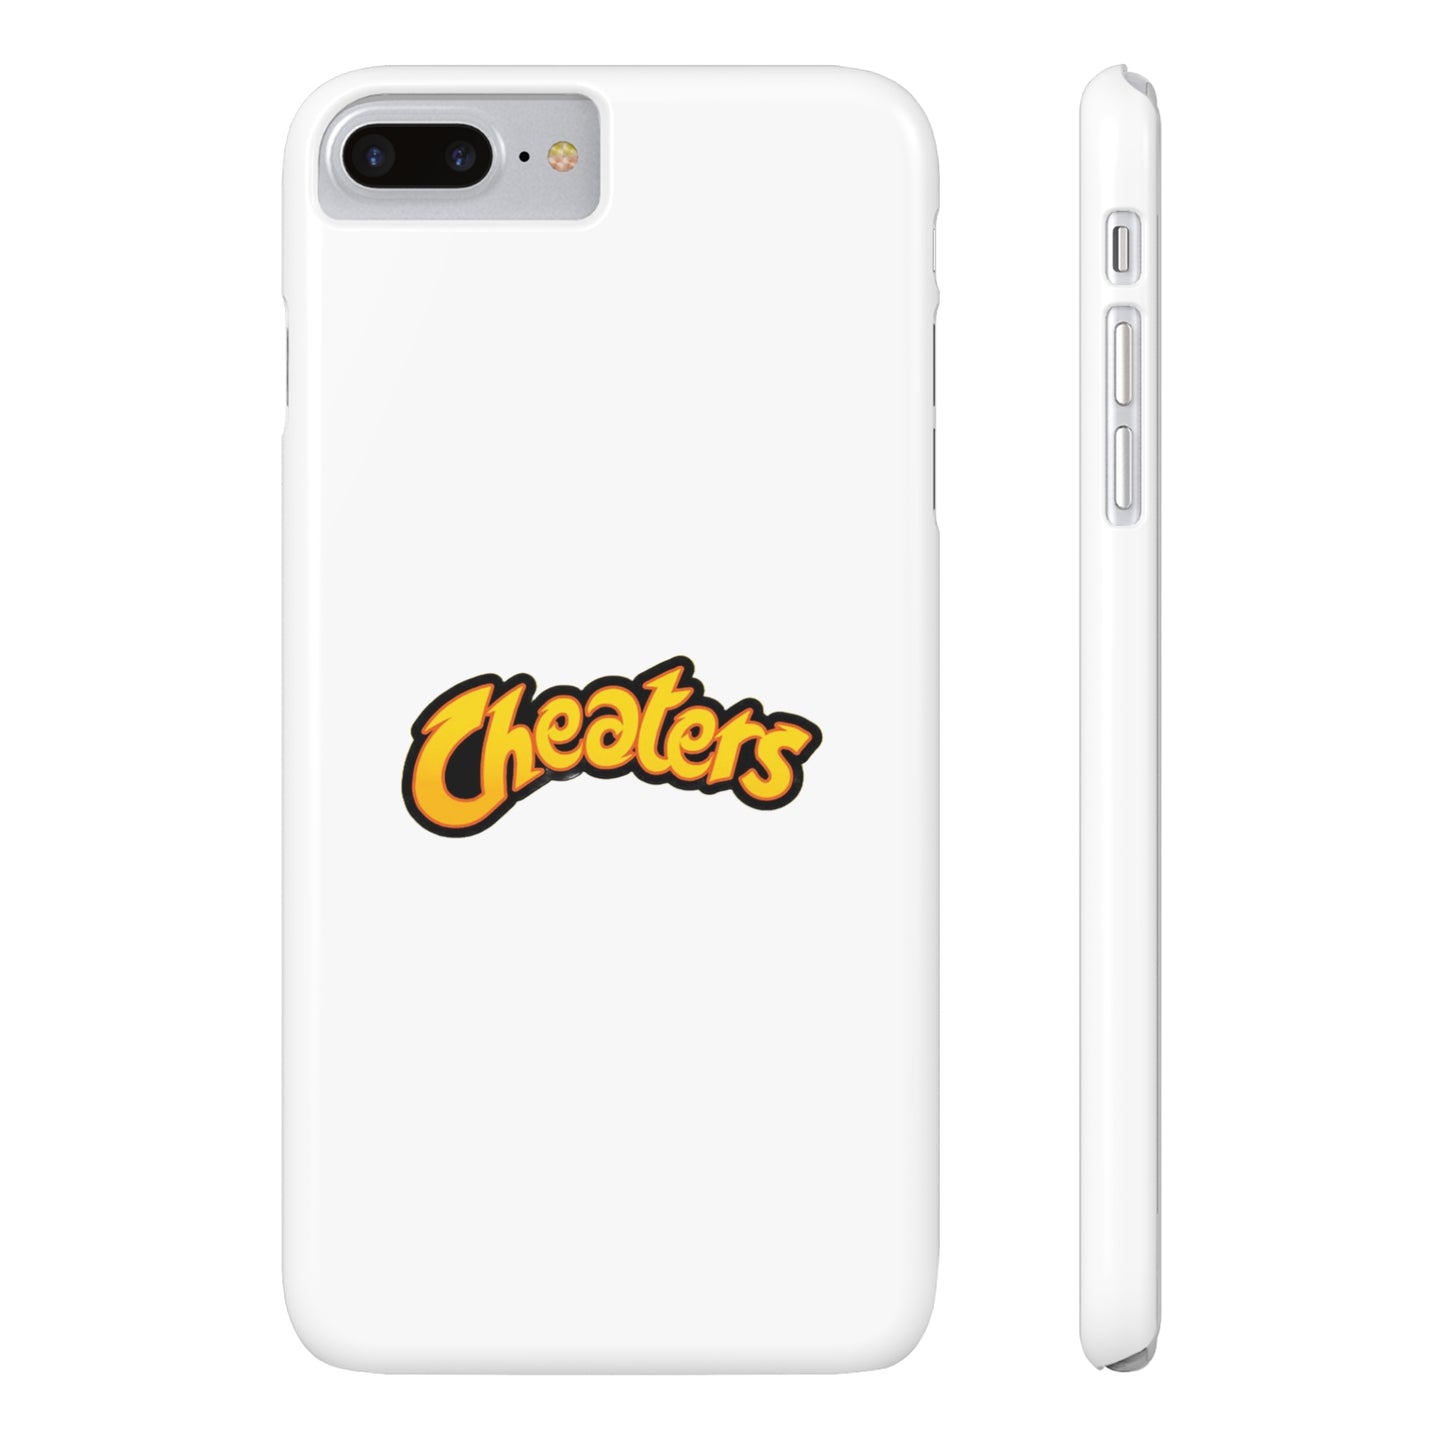 "Cheaters" MagStrong Phone Cases iPhone 7 Plus, iPhone 8 Plus Slim